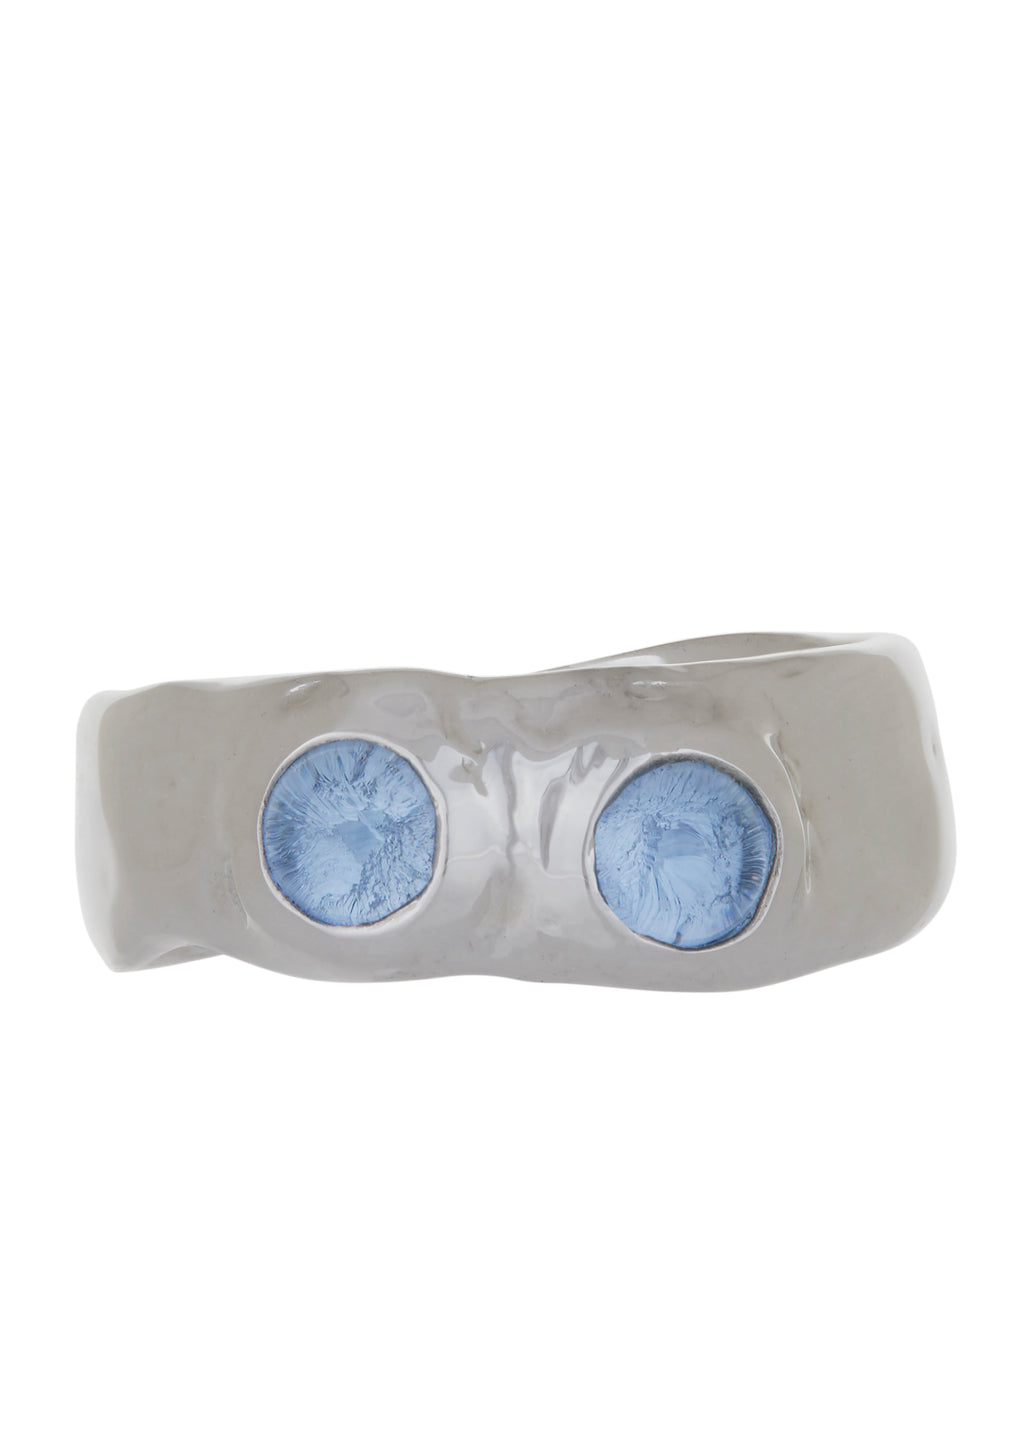 Felt Ring in Sterling Silver - Ice Blue